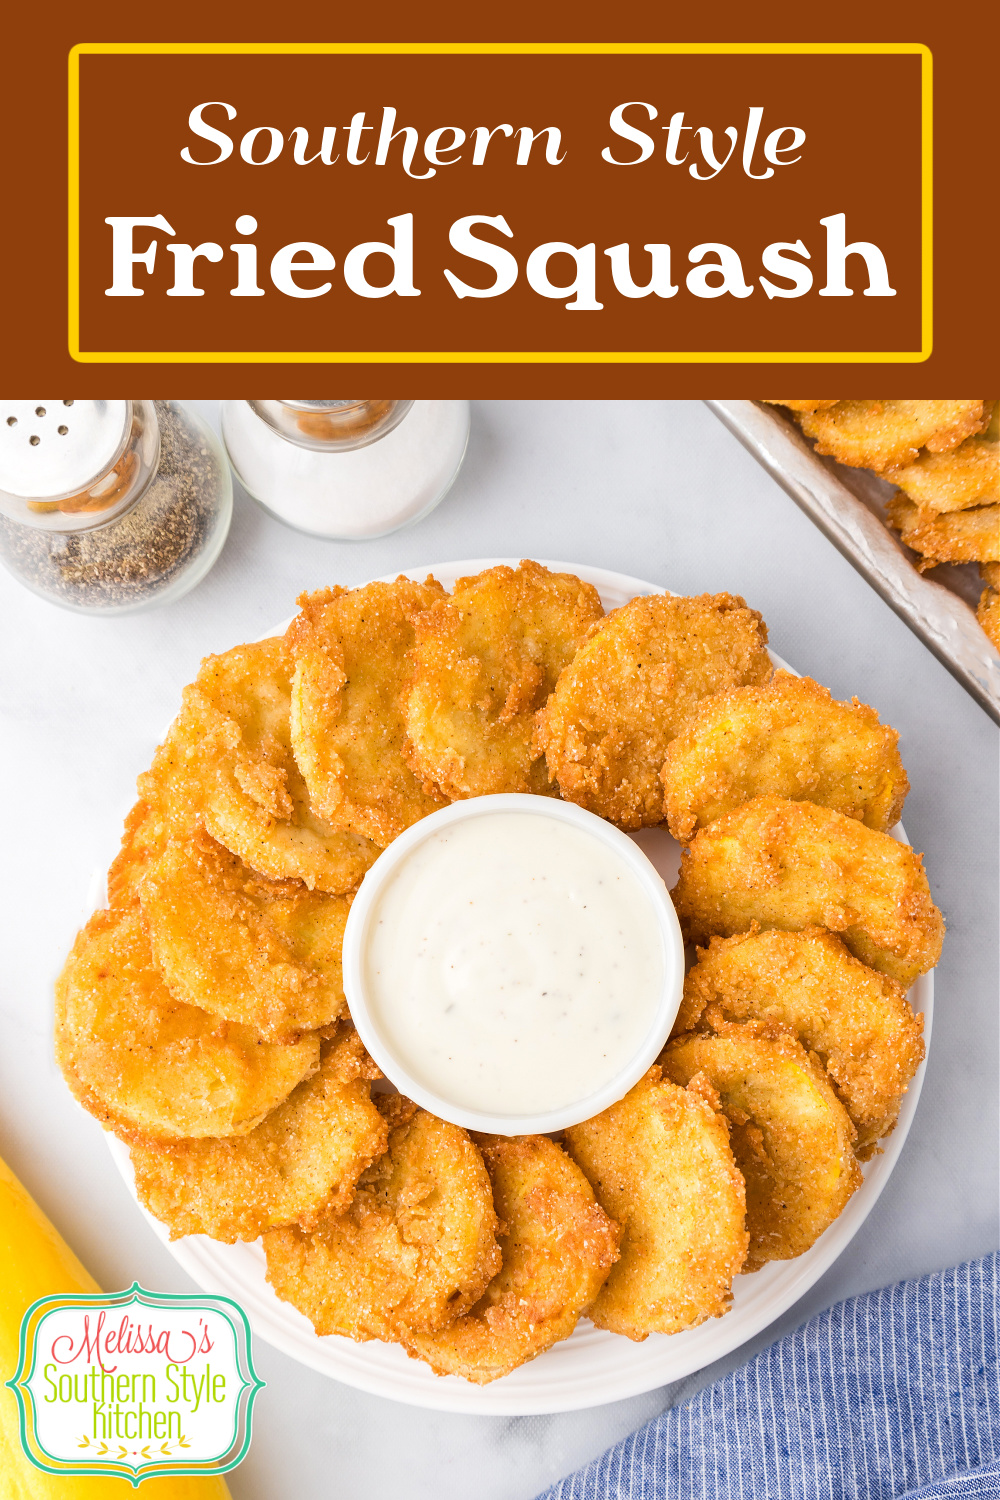 This Southern style Fried Squash can be served as a side dish or an appetizer with your favorite sauces or Ranch dressing for dipping. #friedsquash #squashrecipes #easyfriedsquash #southernstylesquash #cookedsquash #yellowsquash #summersquashrecipes